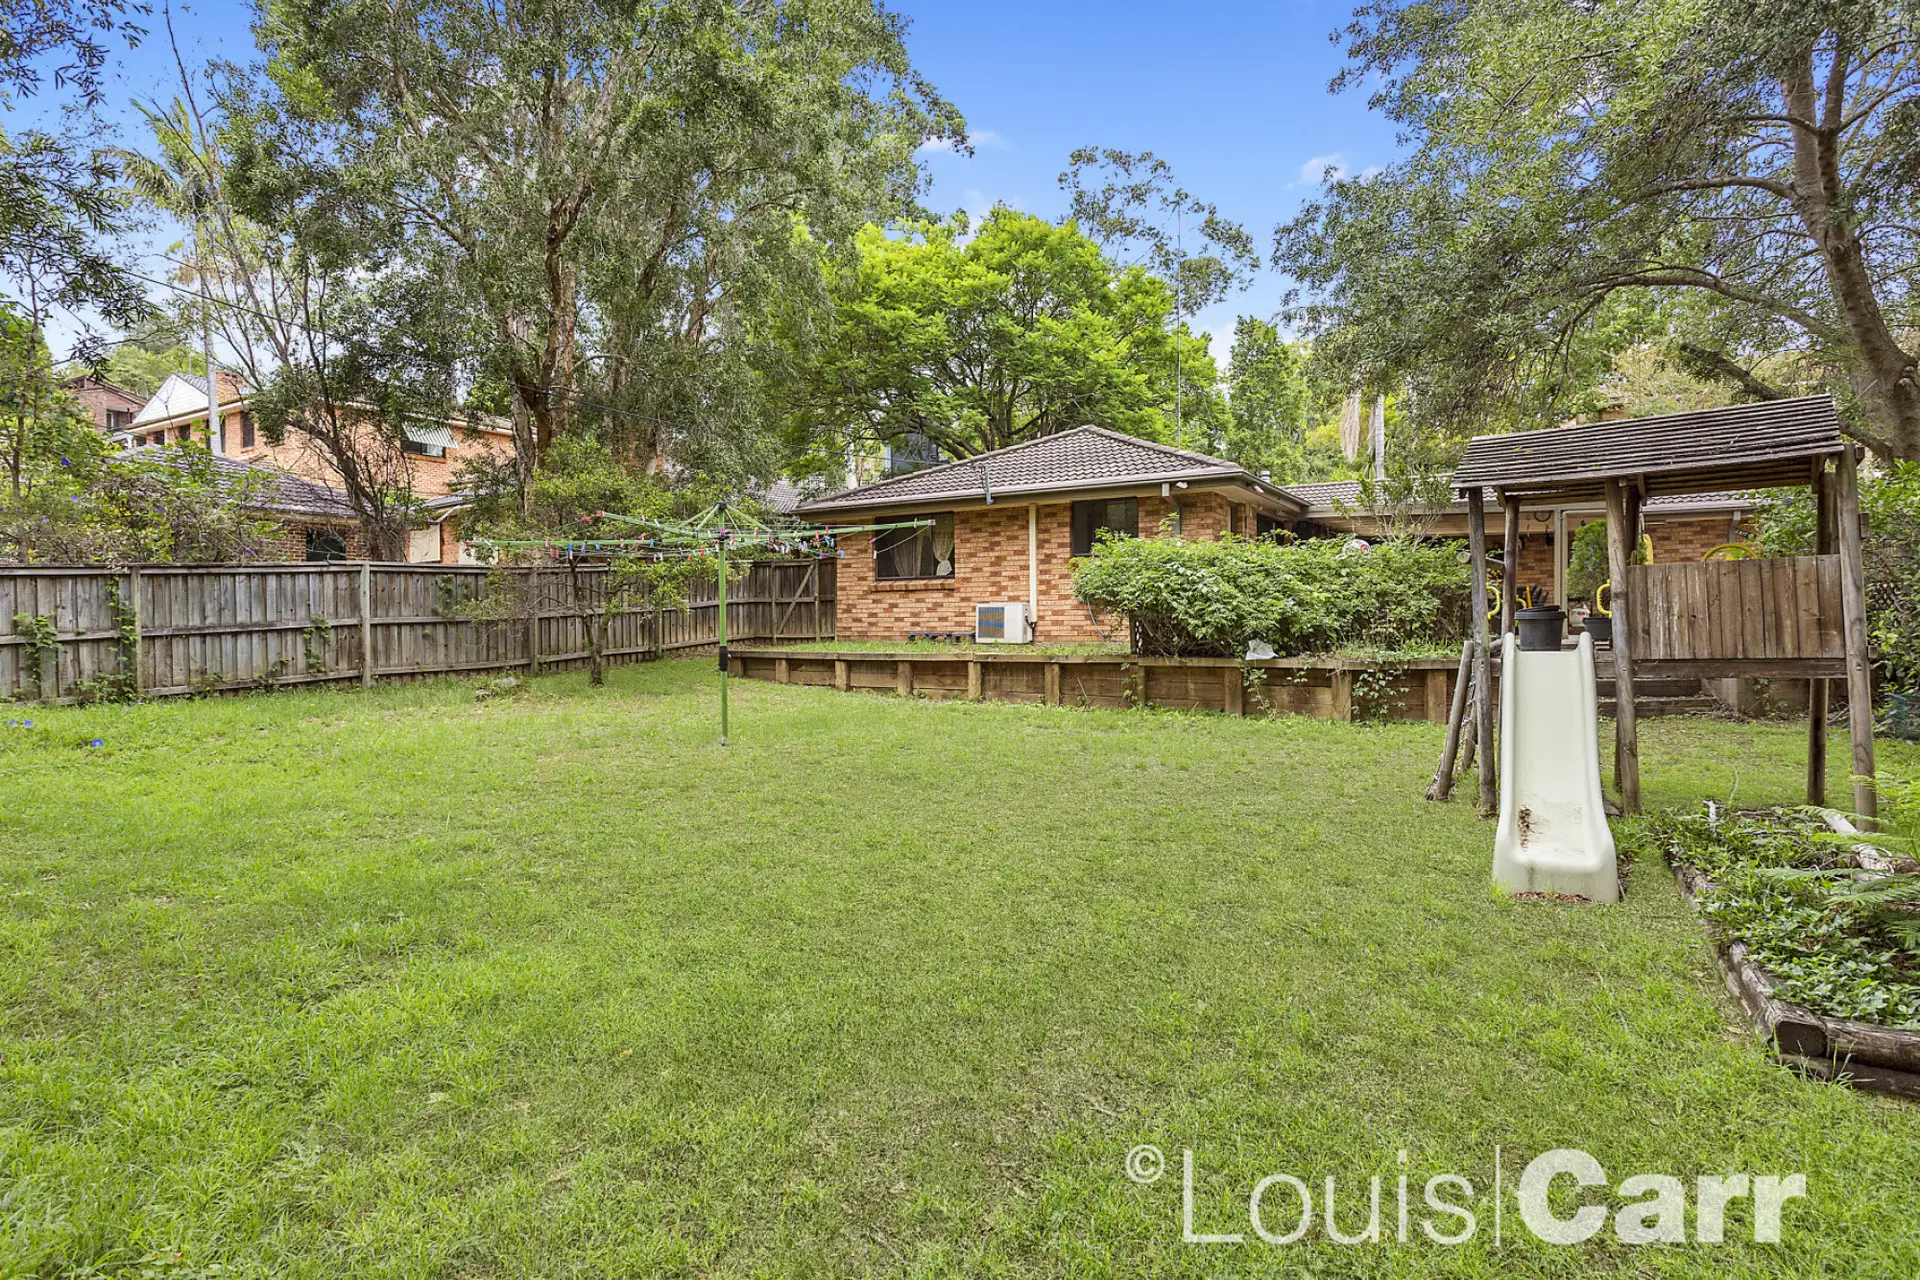 Photo #4: 20 Maybush Place, Cherrybrook - Sold by Louis Carr Real Estate